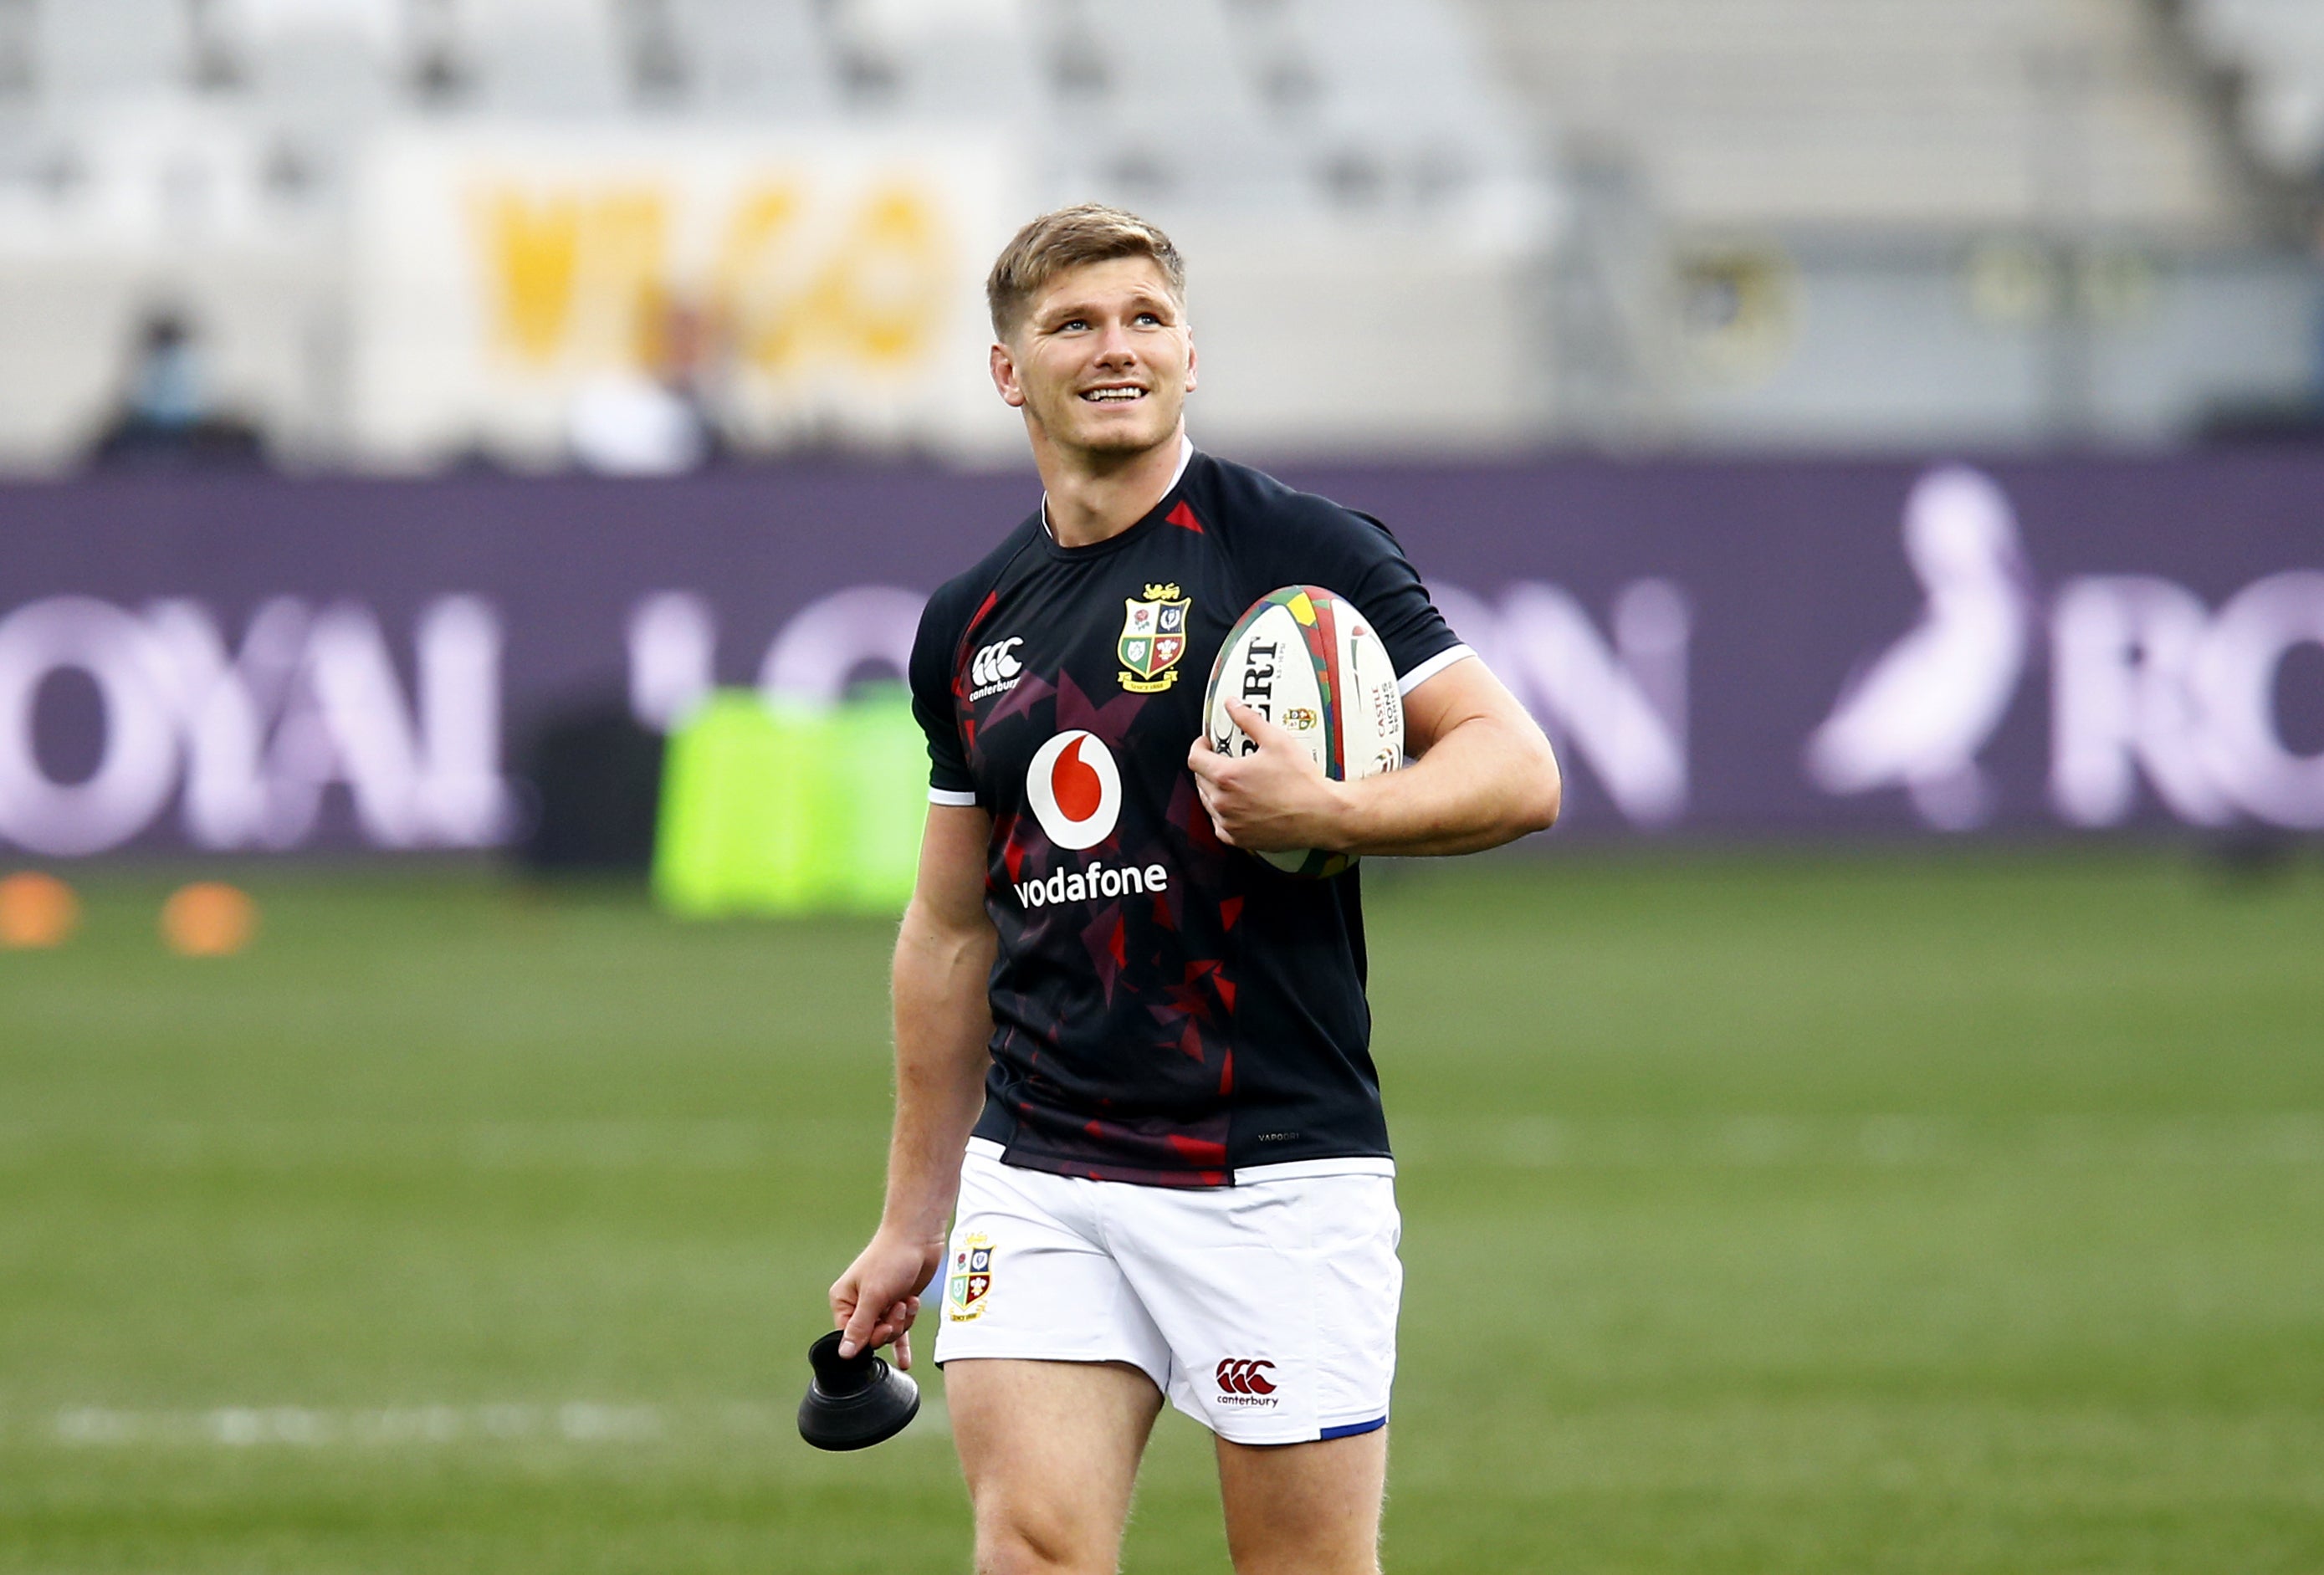 Owen Farrell was dropped from the matchday squad for the British and Irish Lions’ series-decider in South Africa (Steve Haag/PA)